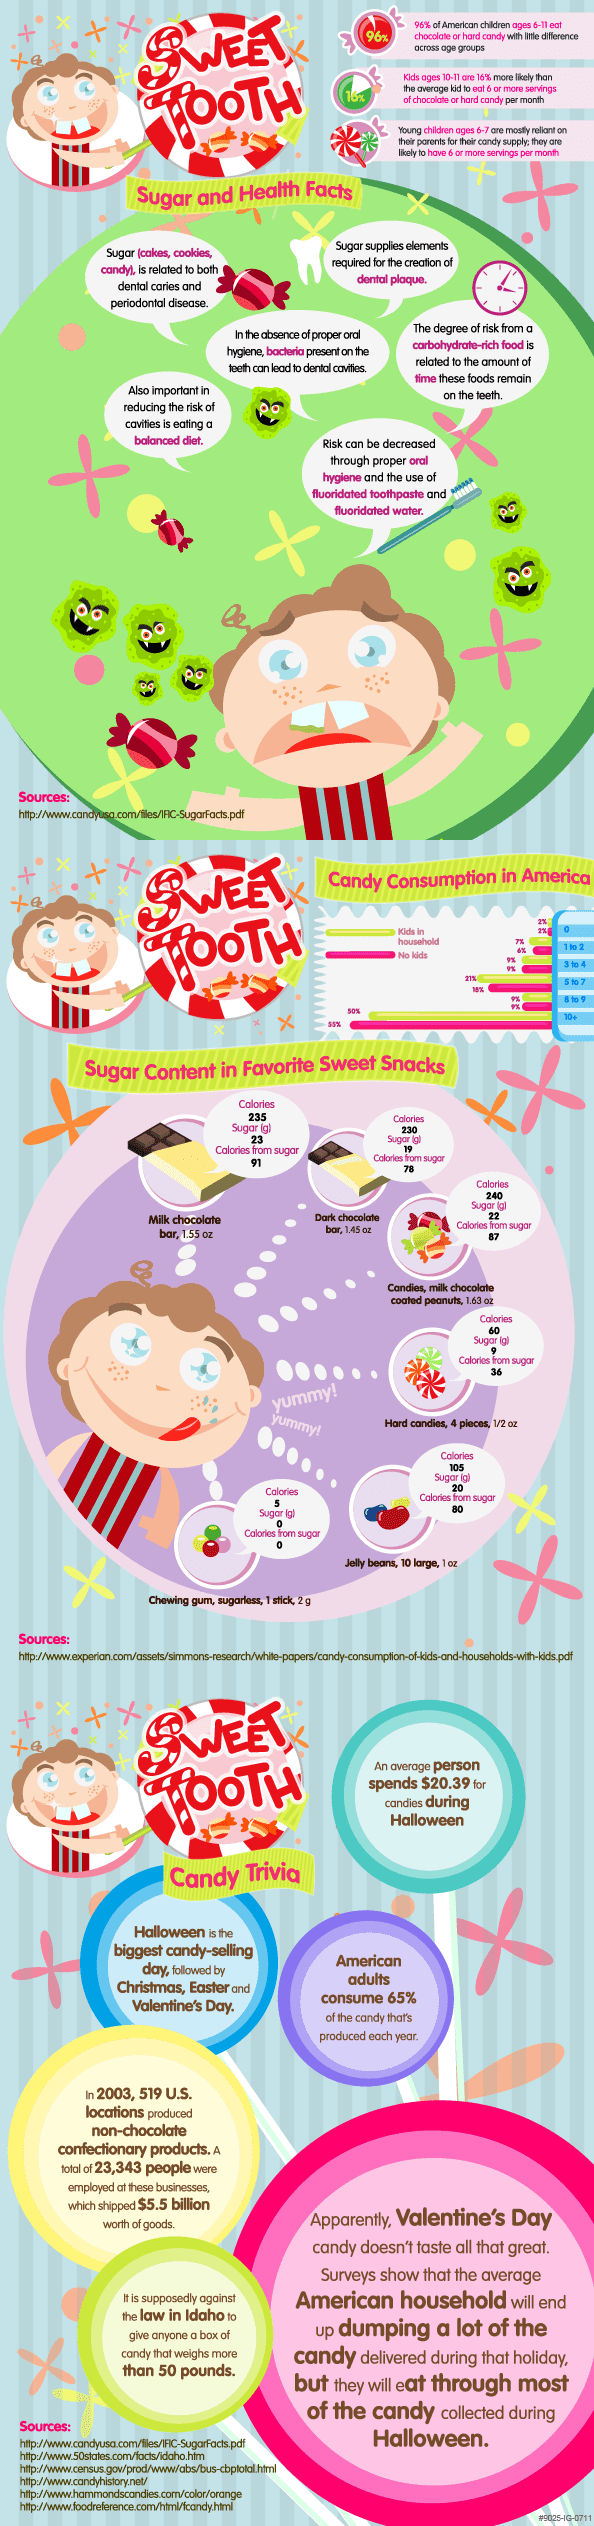 Candy Consumption Among Children